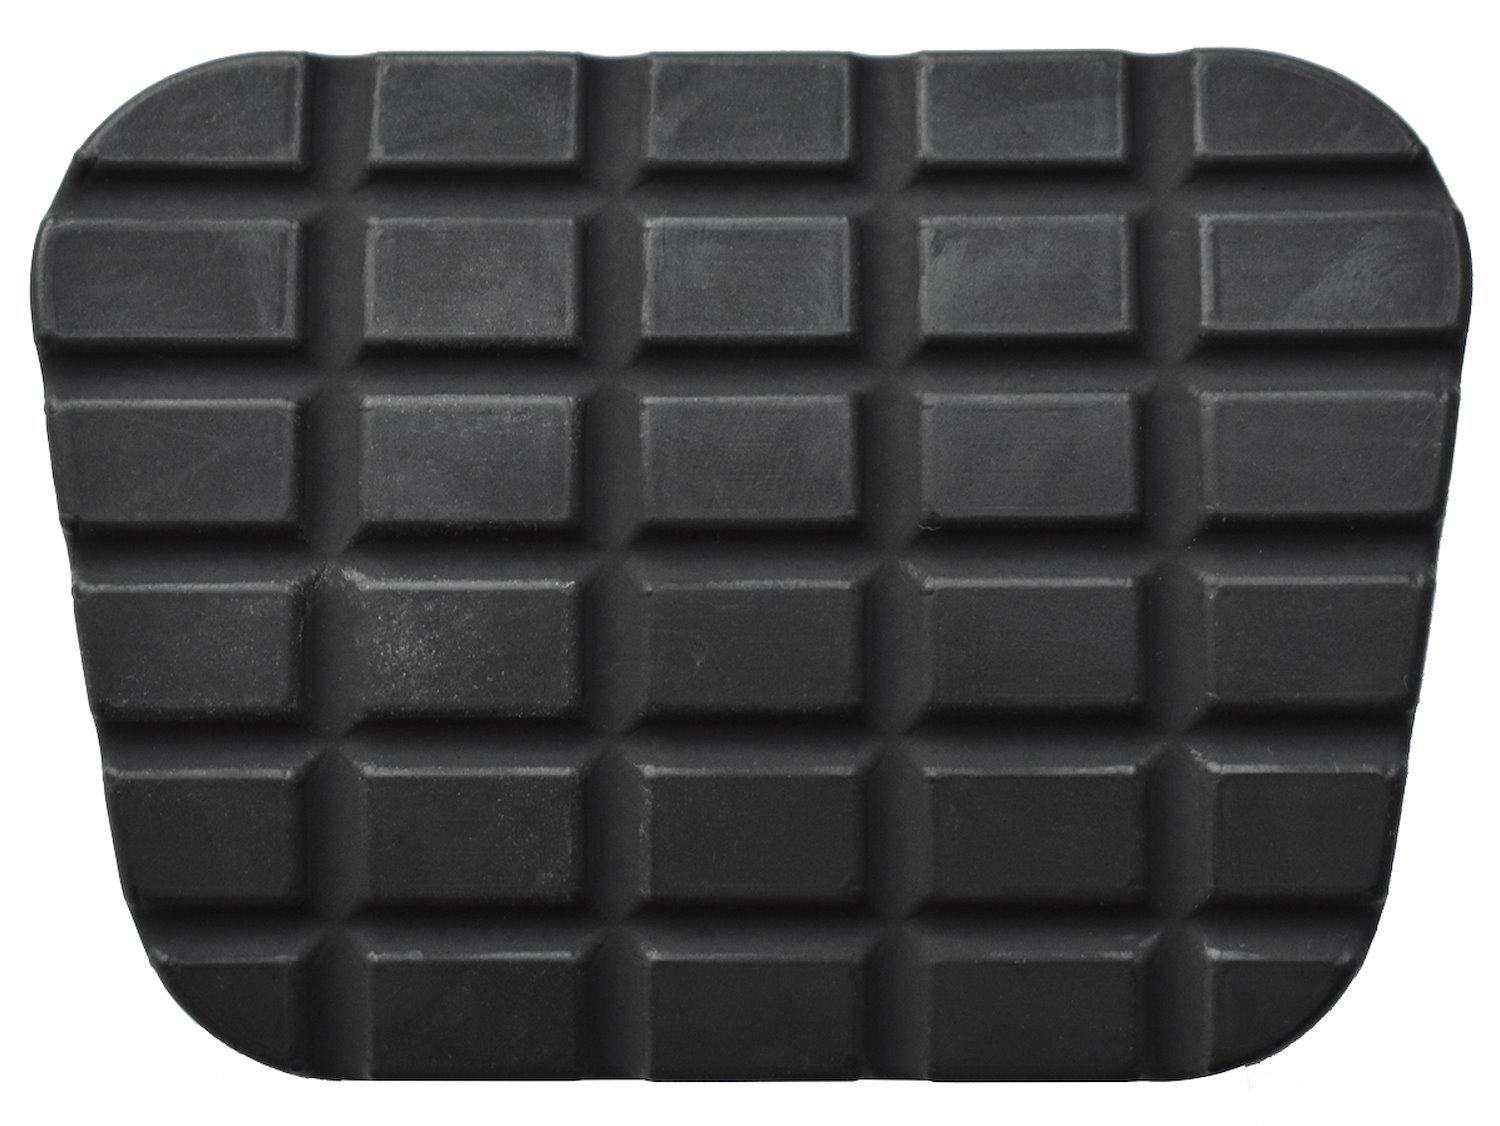 Clutch or Brake Pedal Pad for 1960-1972 GM Trucks